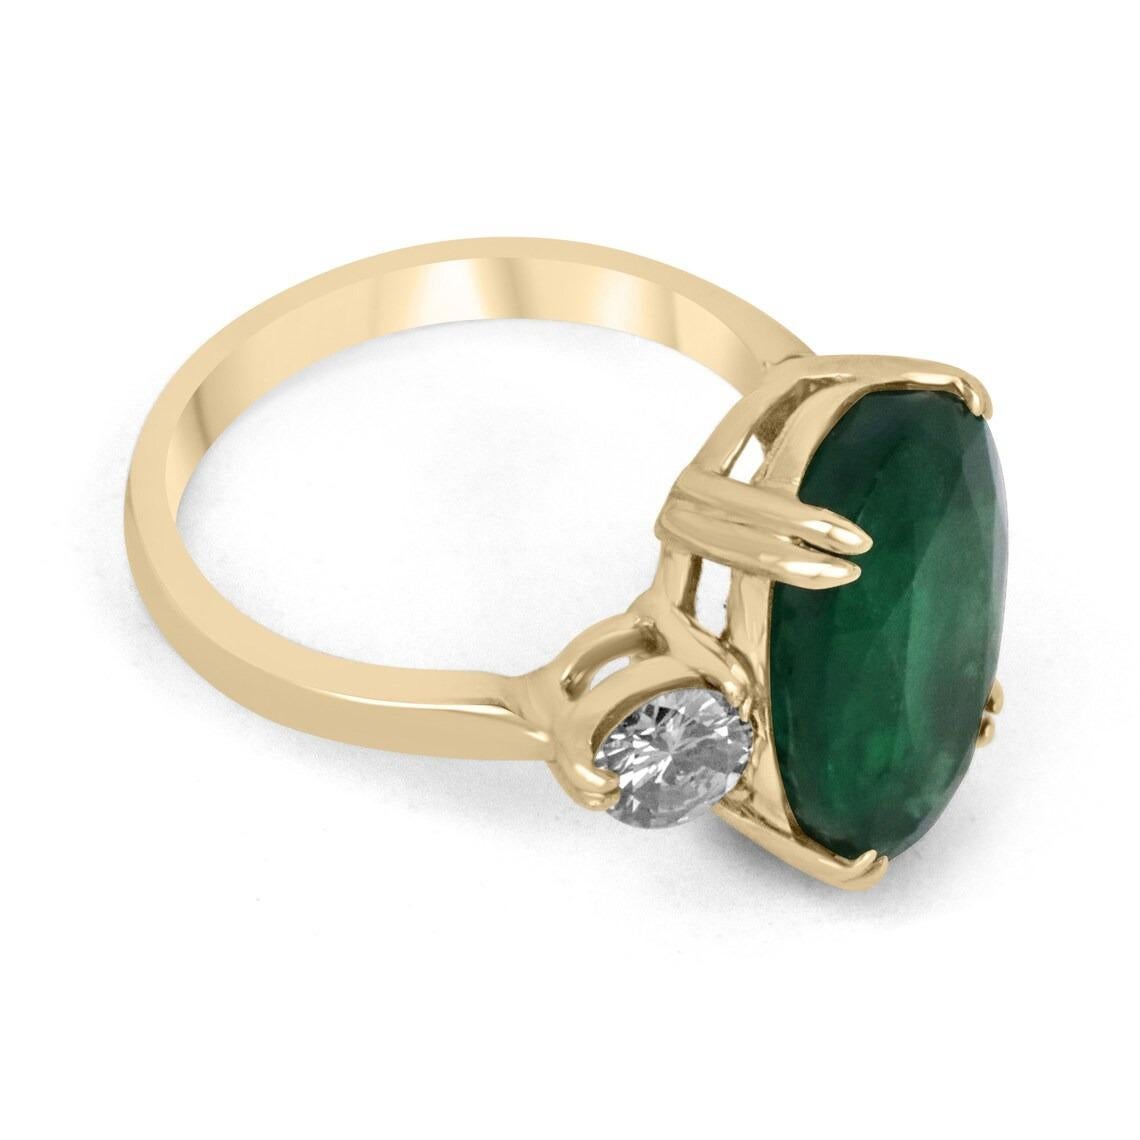 A classic emerald and diamond engagement, statement, or right-hand ring. Dexterously crafted in gleaming 14K gold this ring features a natural oval cut emerald that is set in a secure prong setting. This extraordinary emerald has a deep dark rare